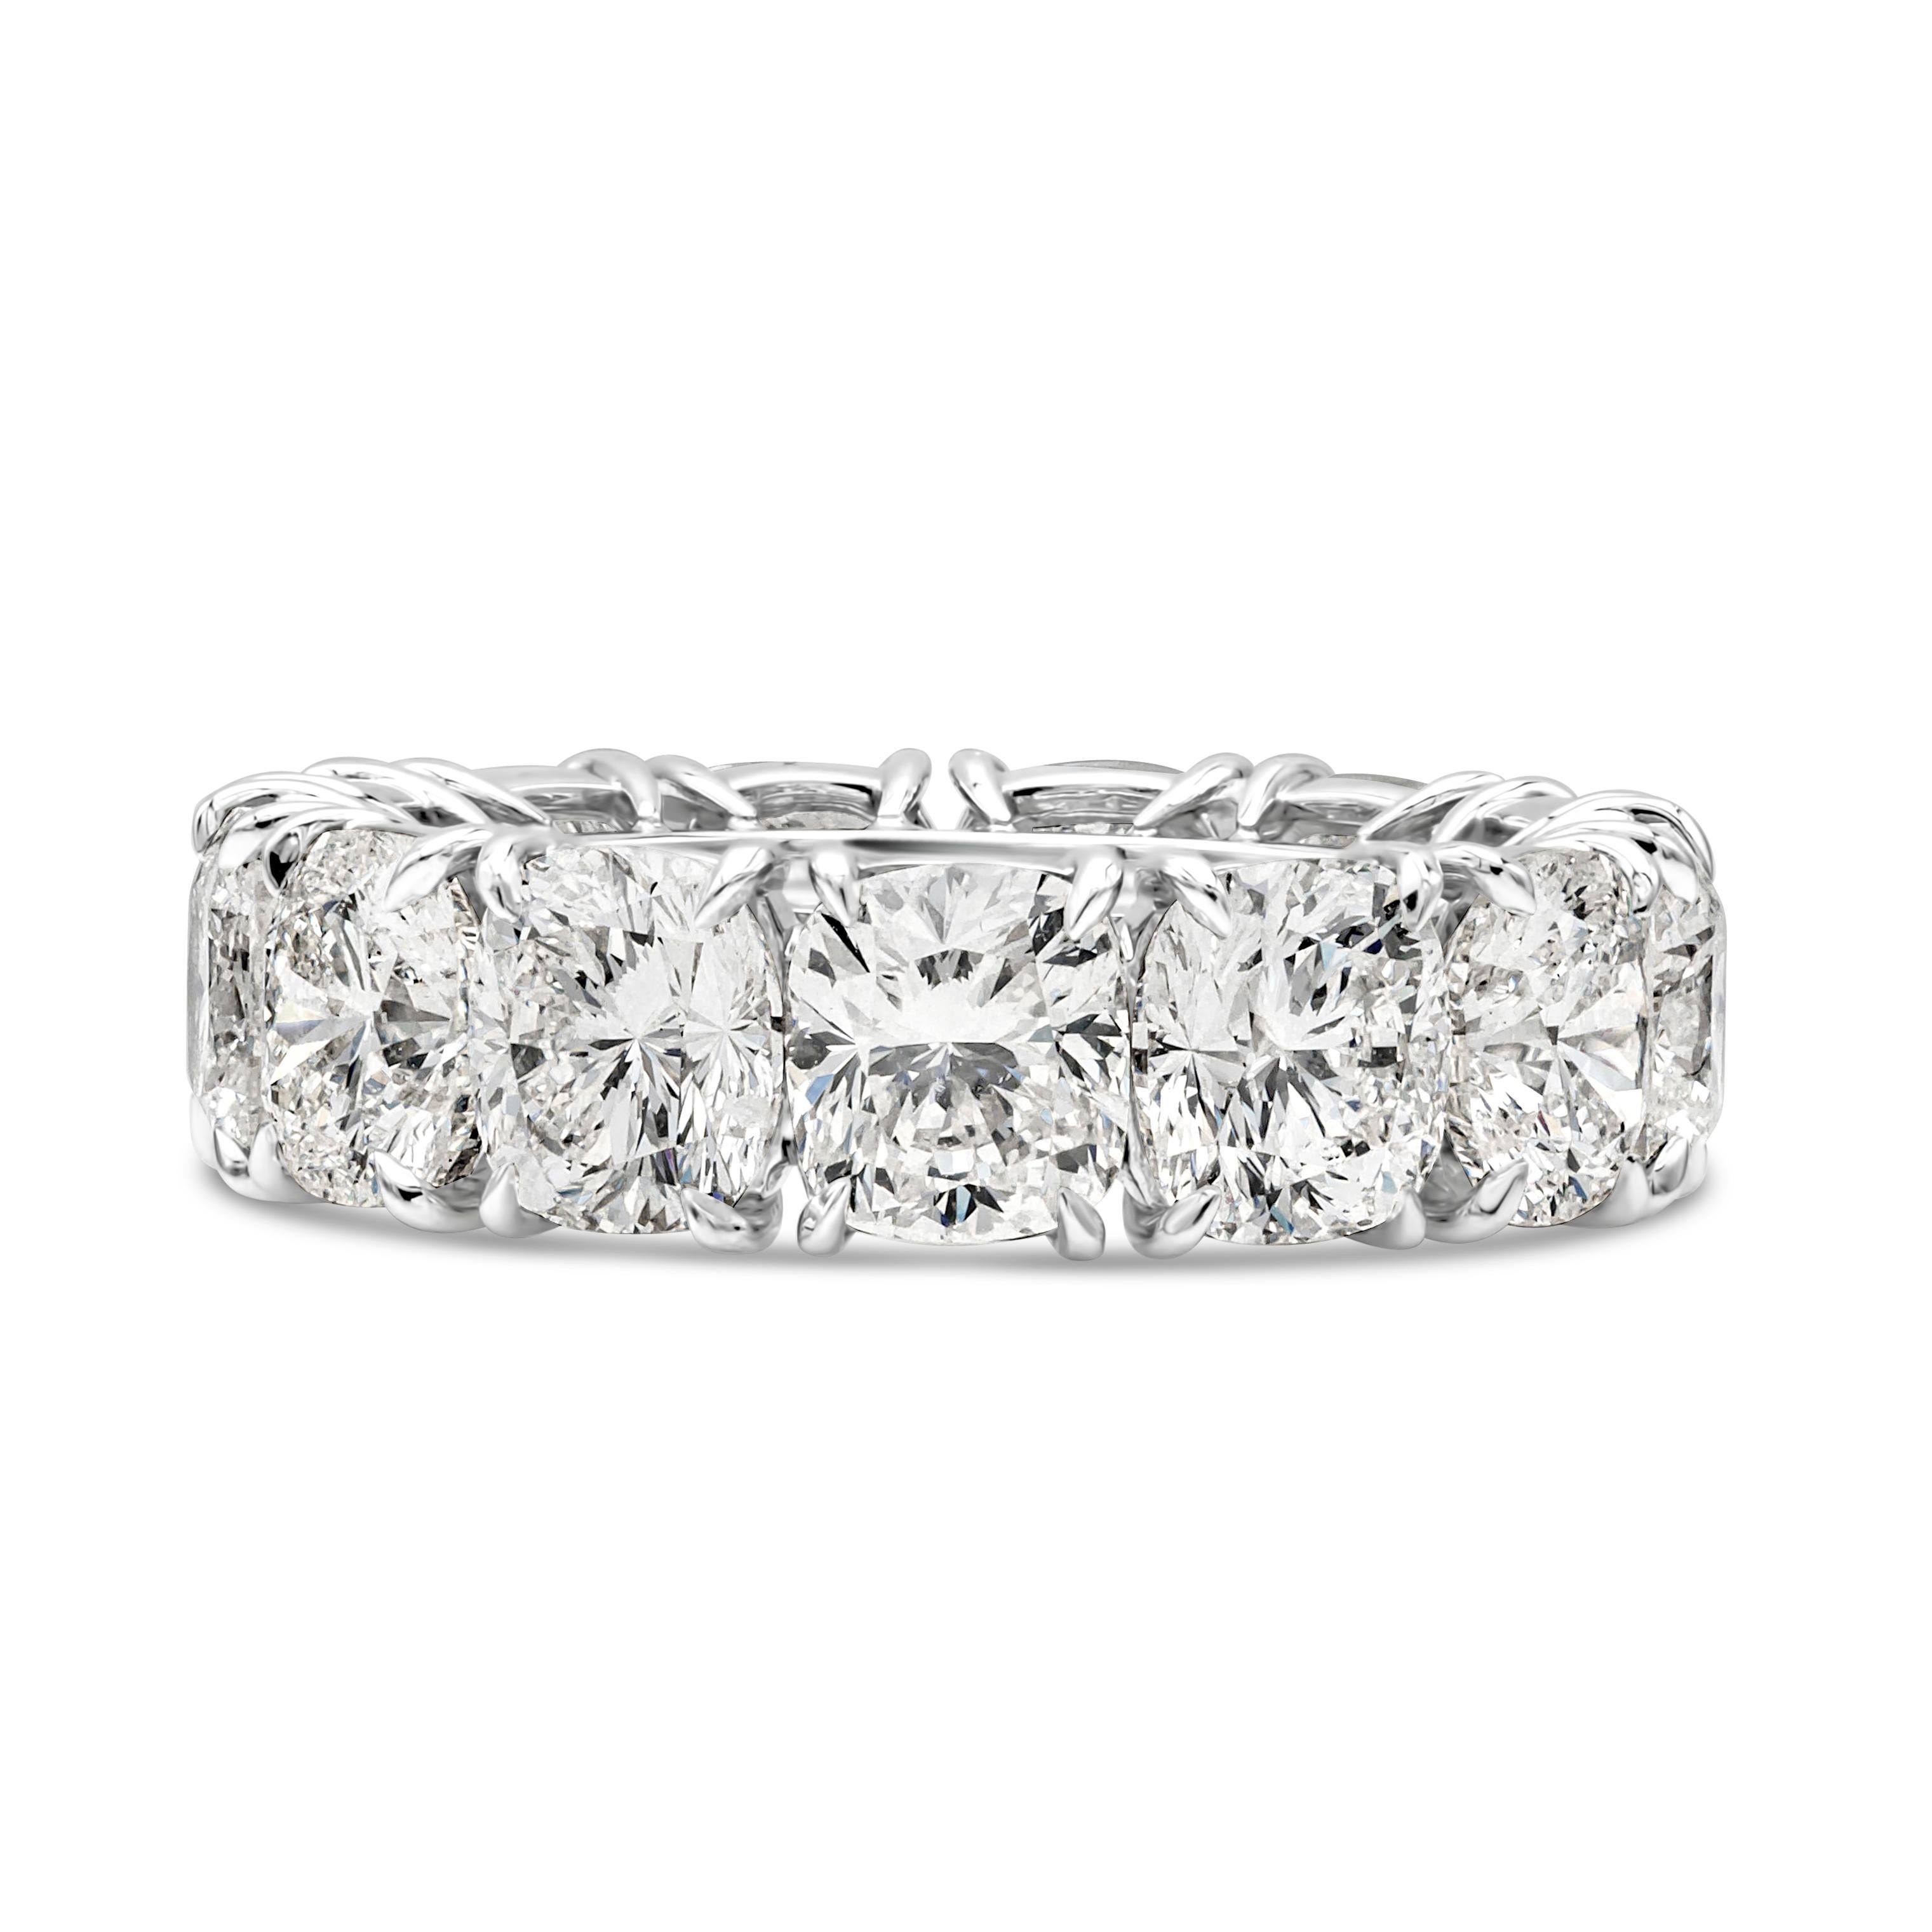 This classic eternity wedding band features 13 cushion cut diamonds weighing 13.47 carats total, F-H Color and SI-I1 in Clarity. Mounted in a classic four-prong basket setting. Finely made in Platinum and Size 7 US resizable upon request.

Style